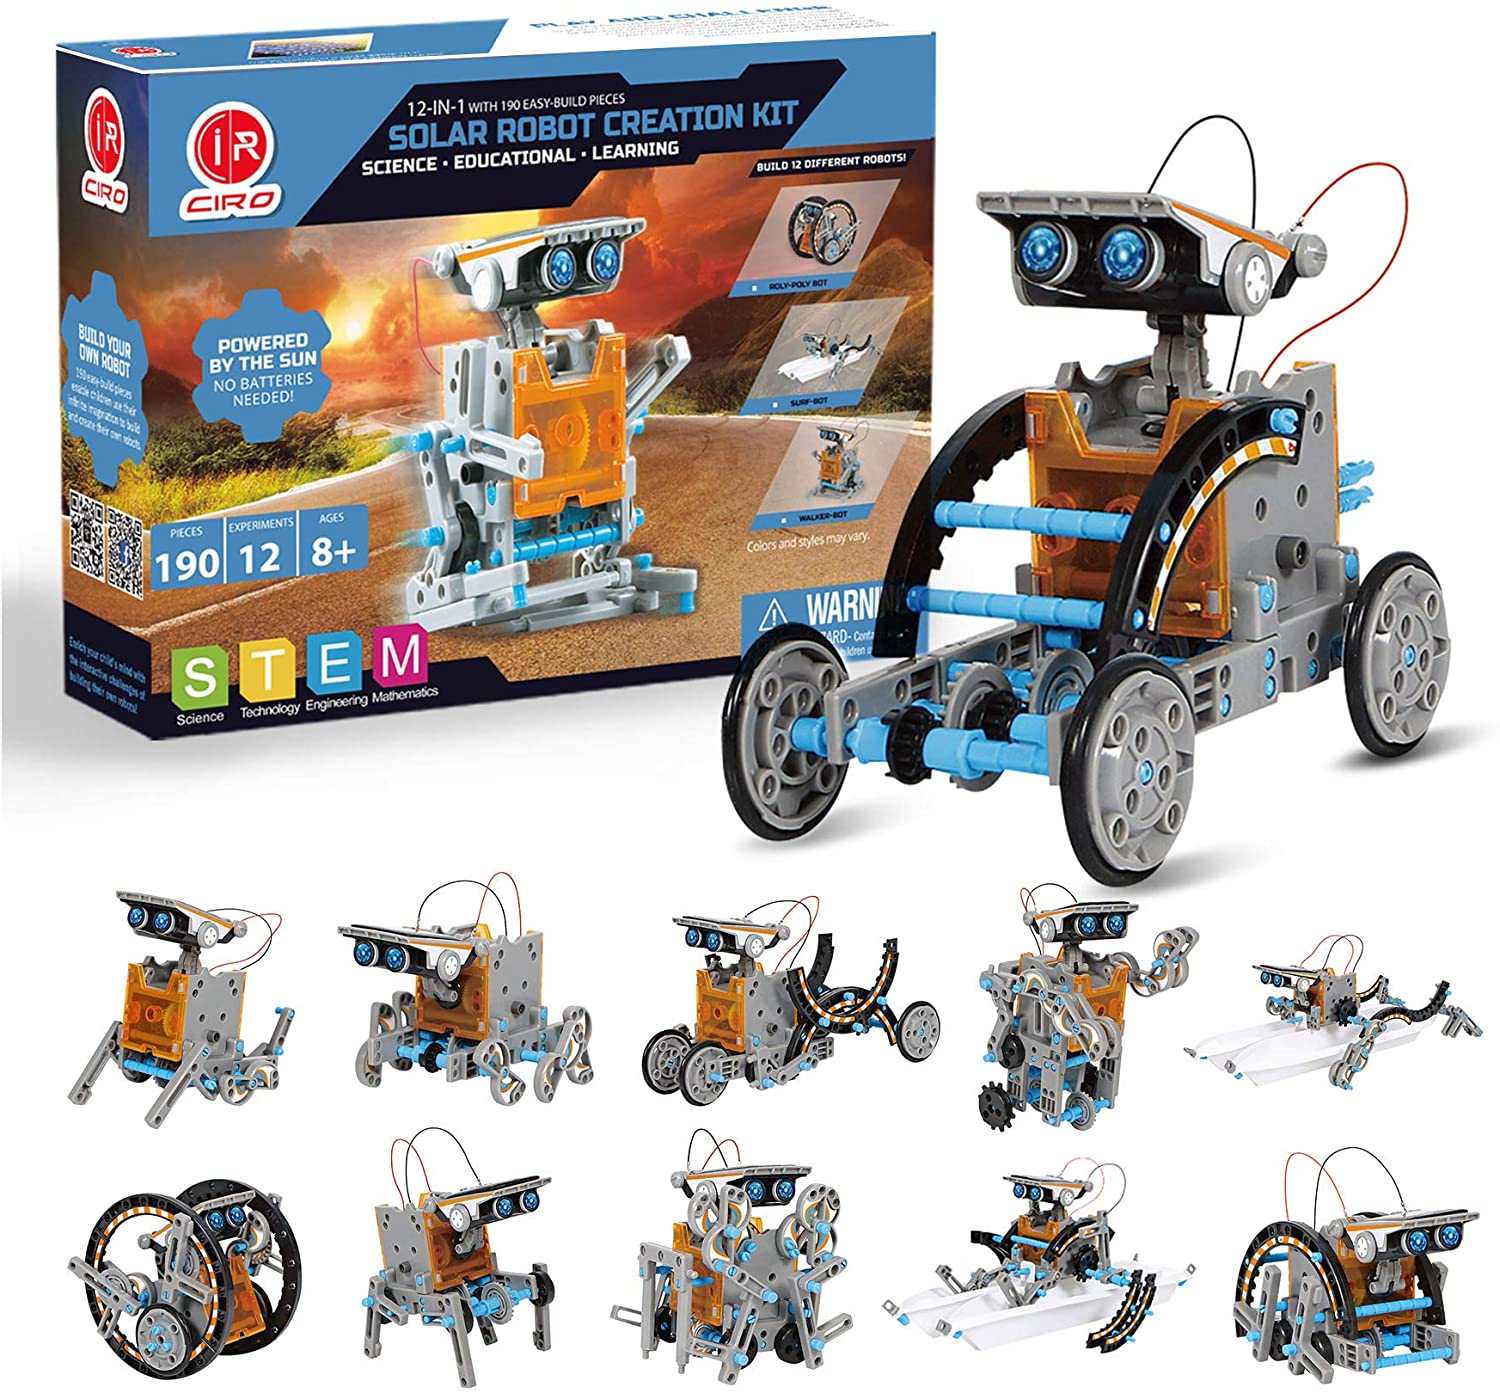 2 In 1 Build Your Own Robot Kit - STEM